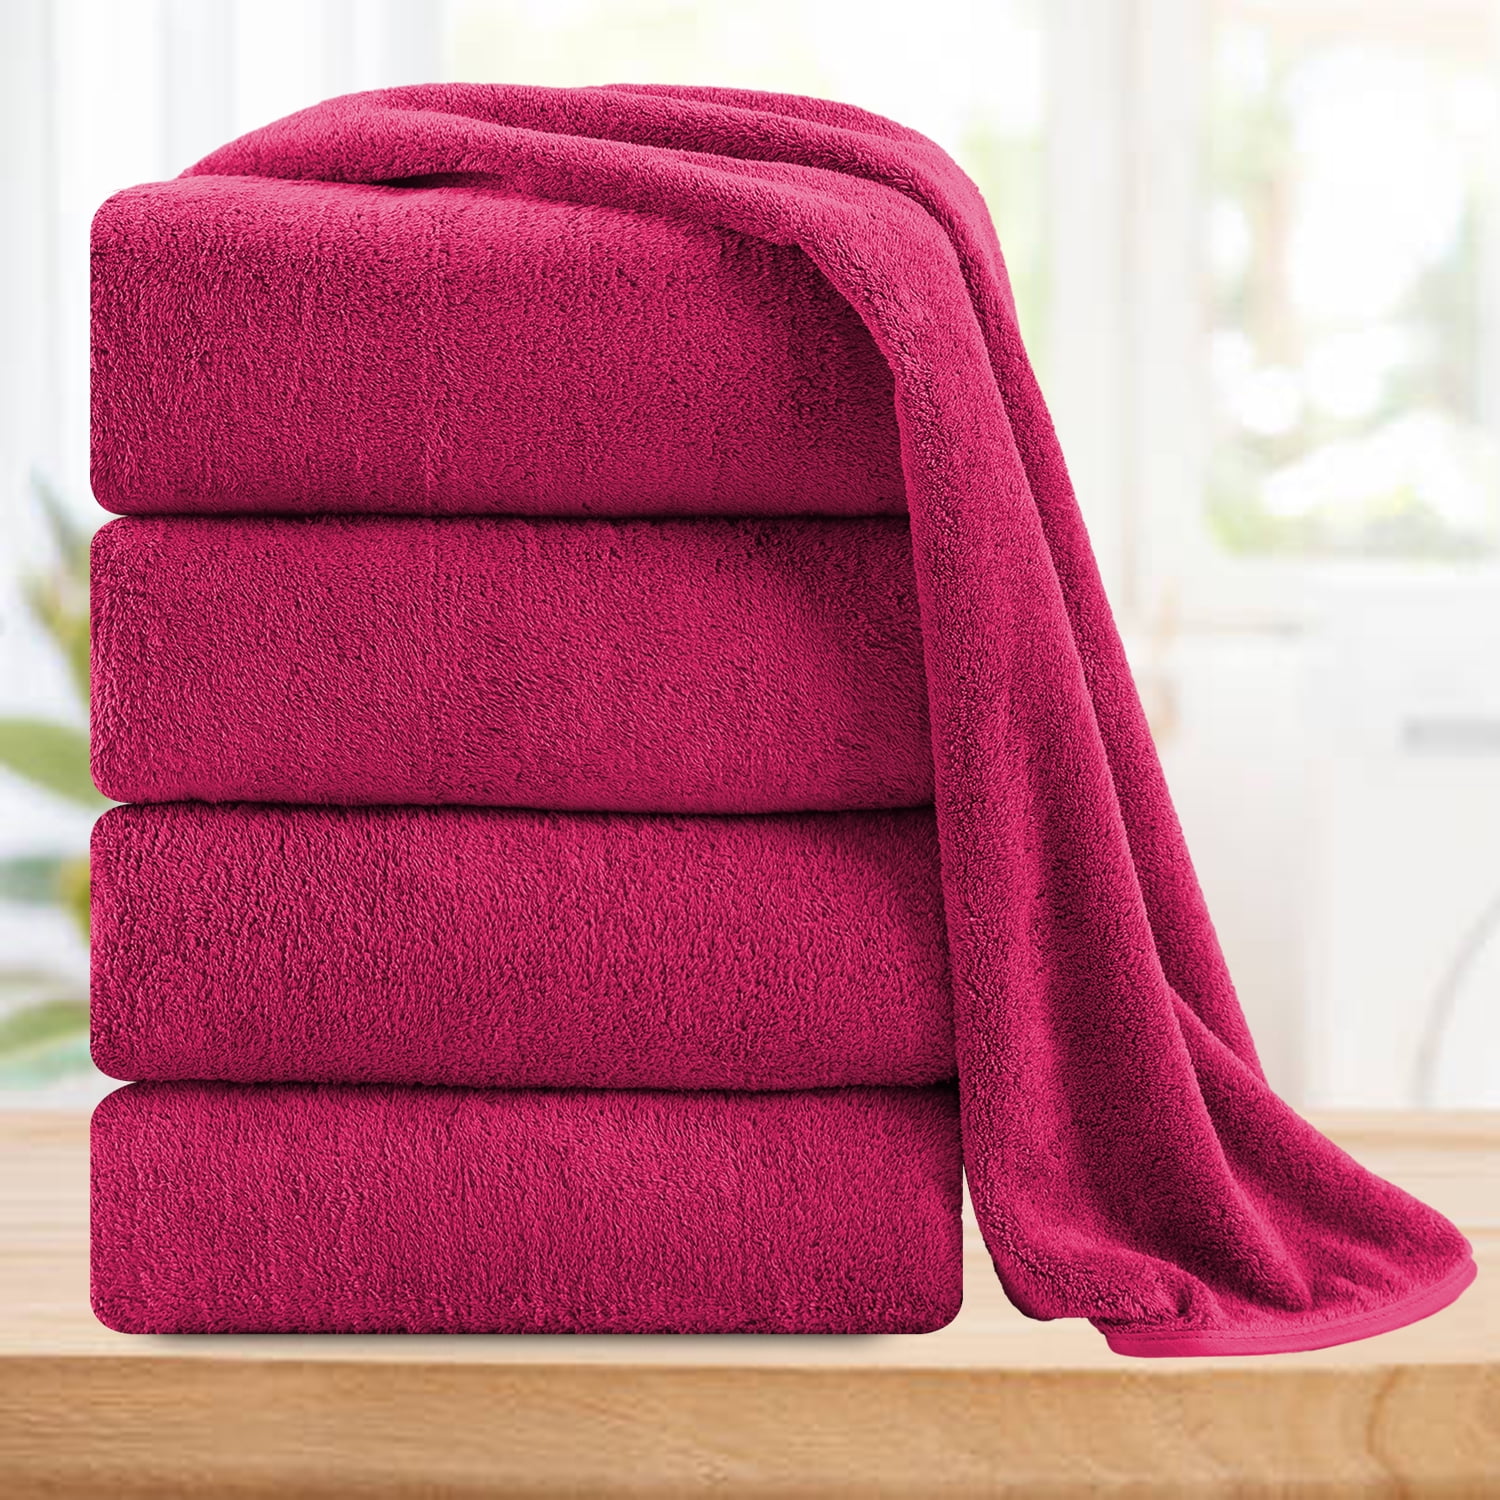 8 Pack Oversized Bath Towel Sets 700 GSM Soft Shower Towels 35 x 70 Inches  Quick